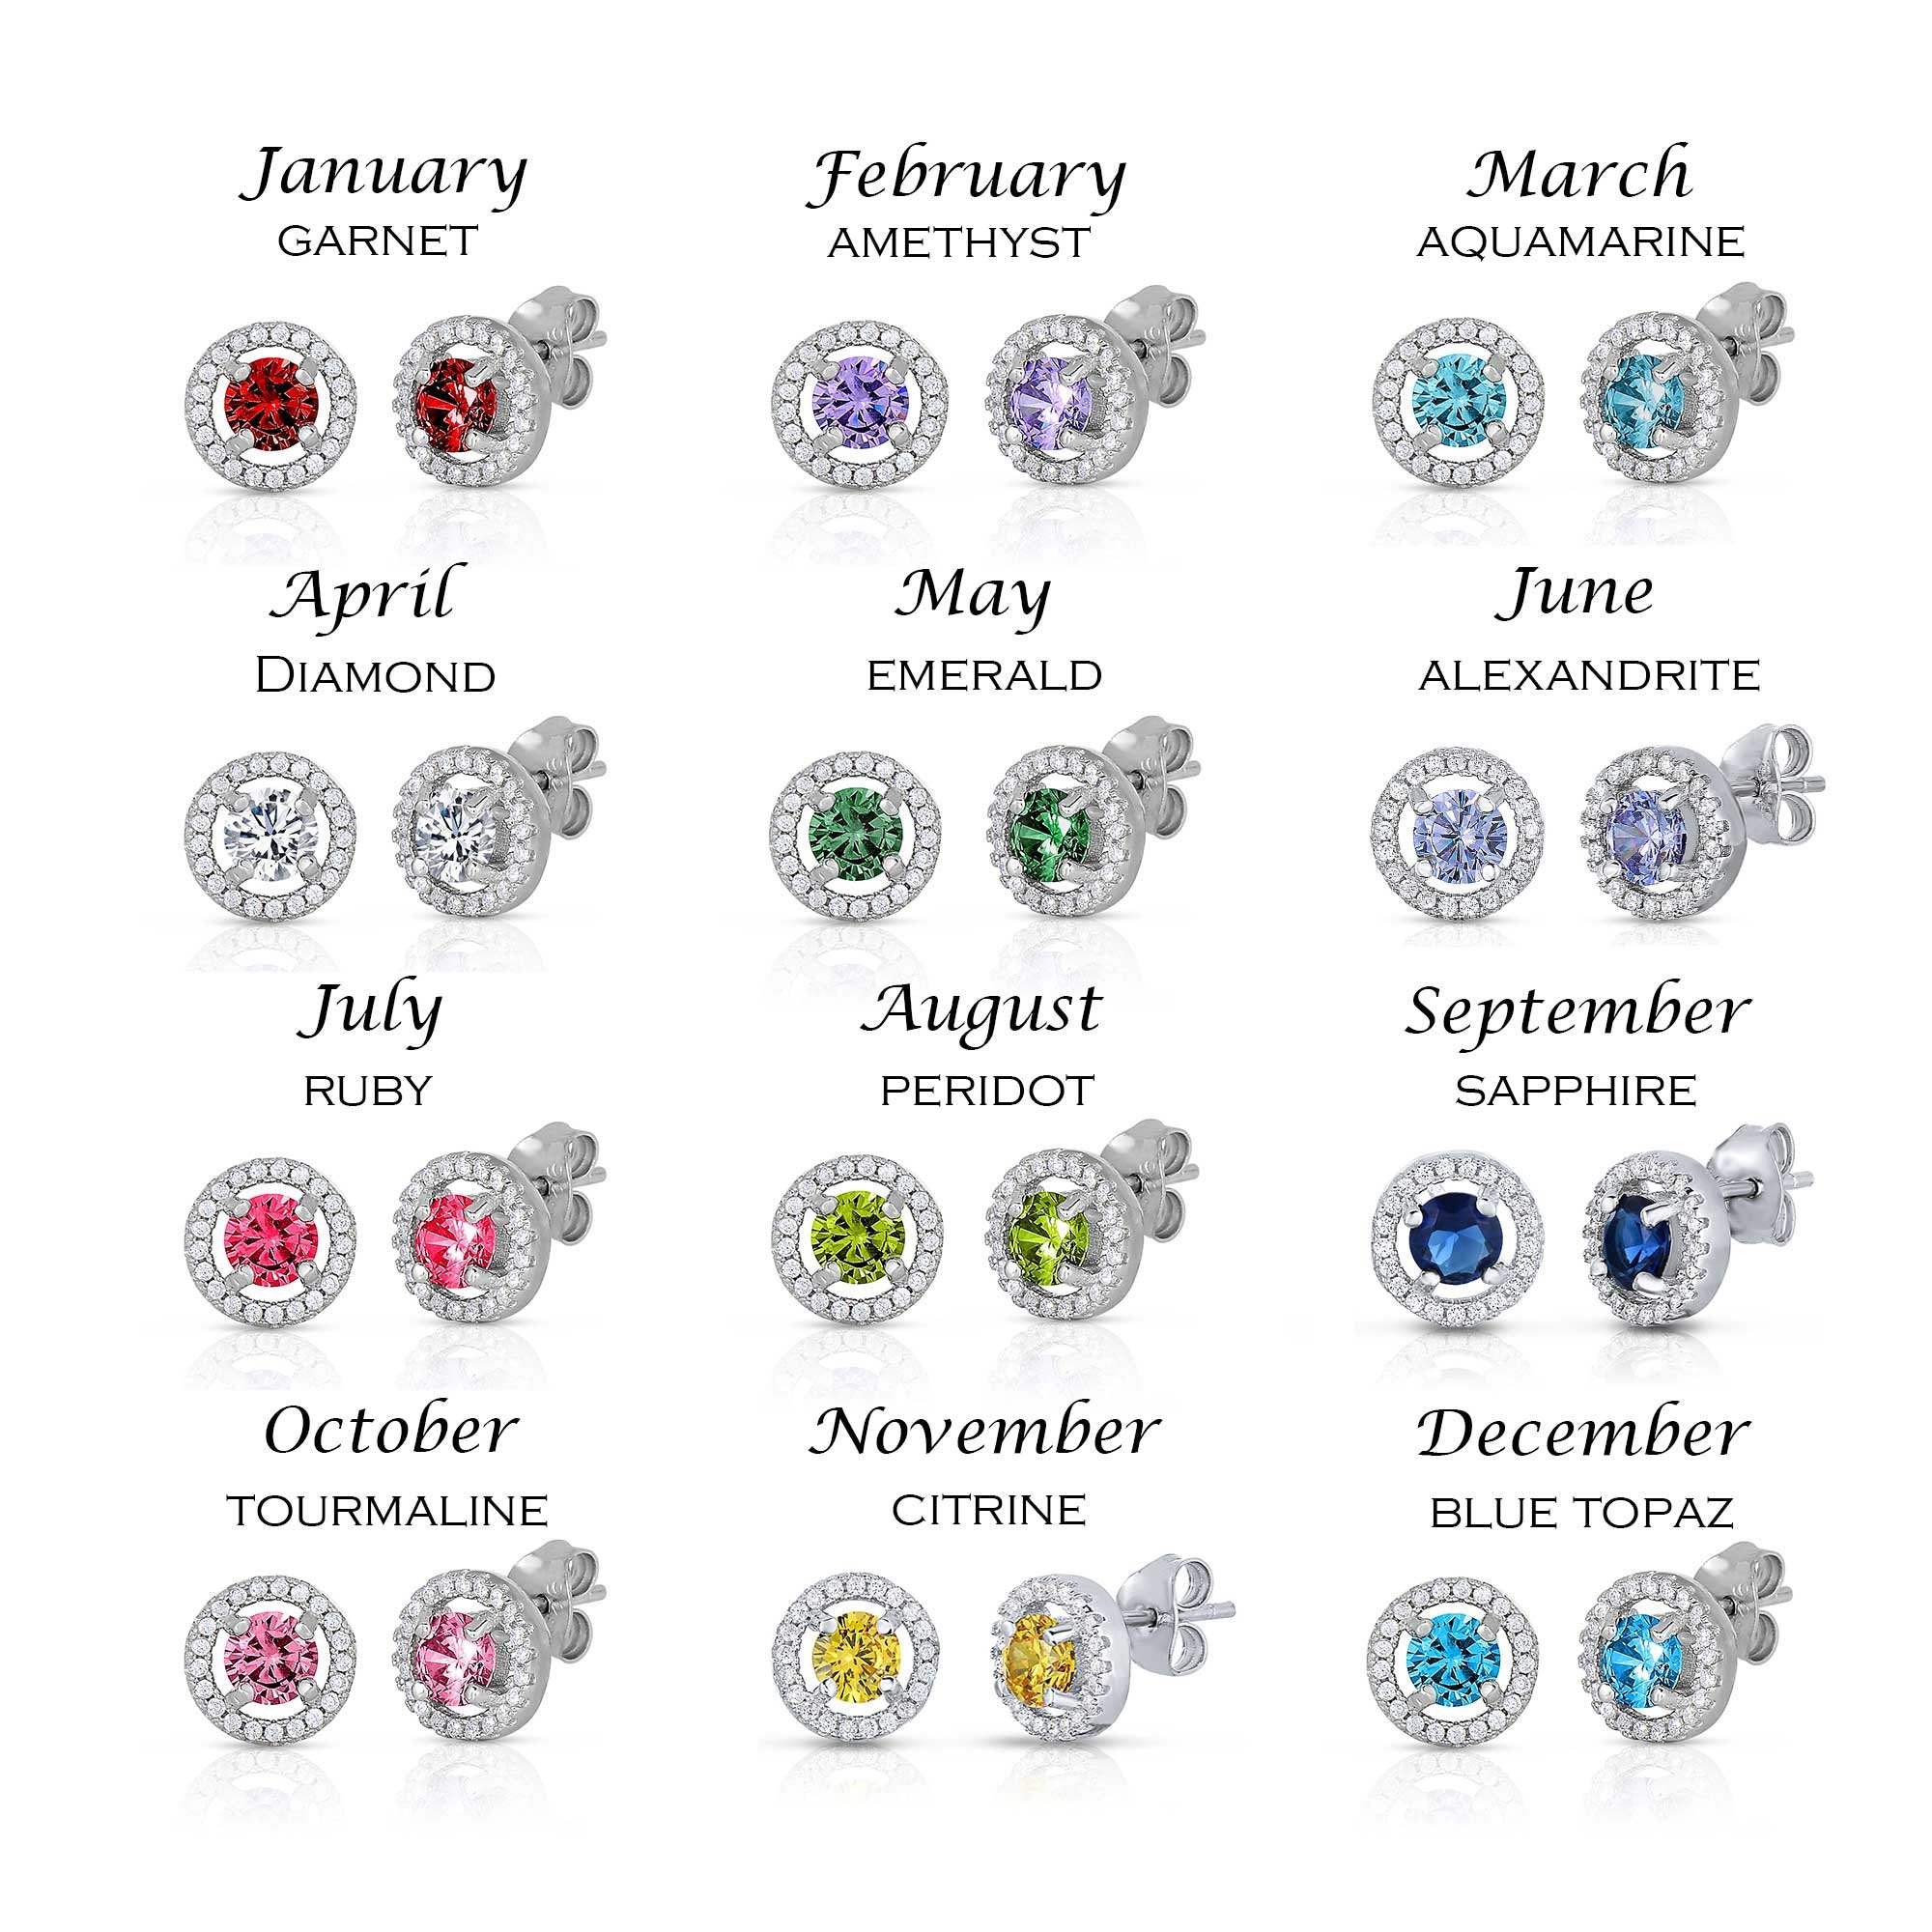 CZ Birthstone Halo Stud Earrings - Available in all 12 colors in Sterling Silver